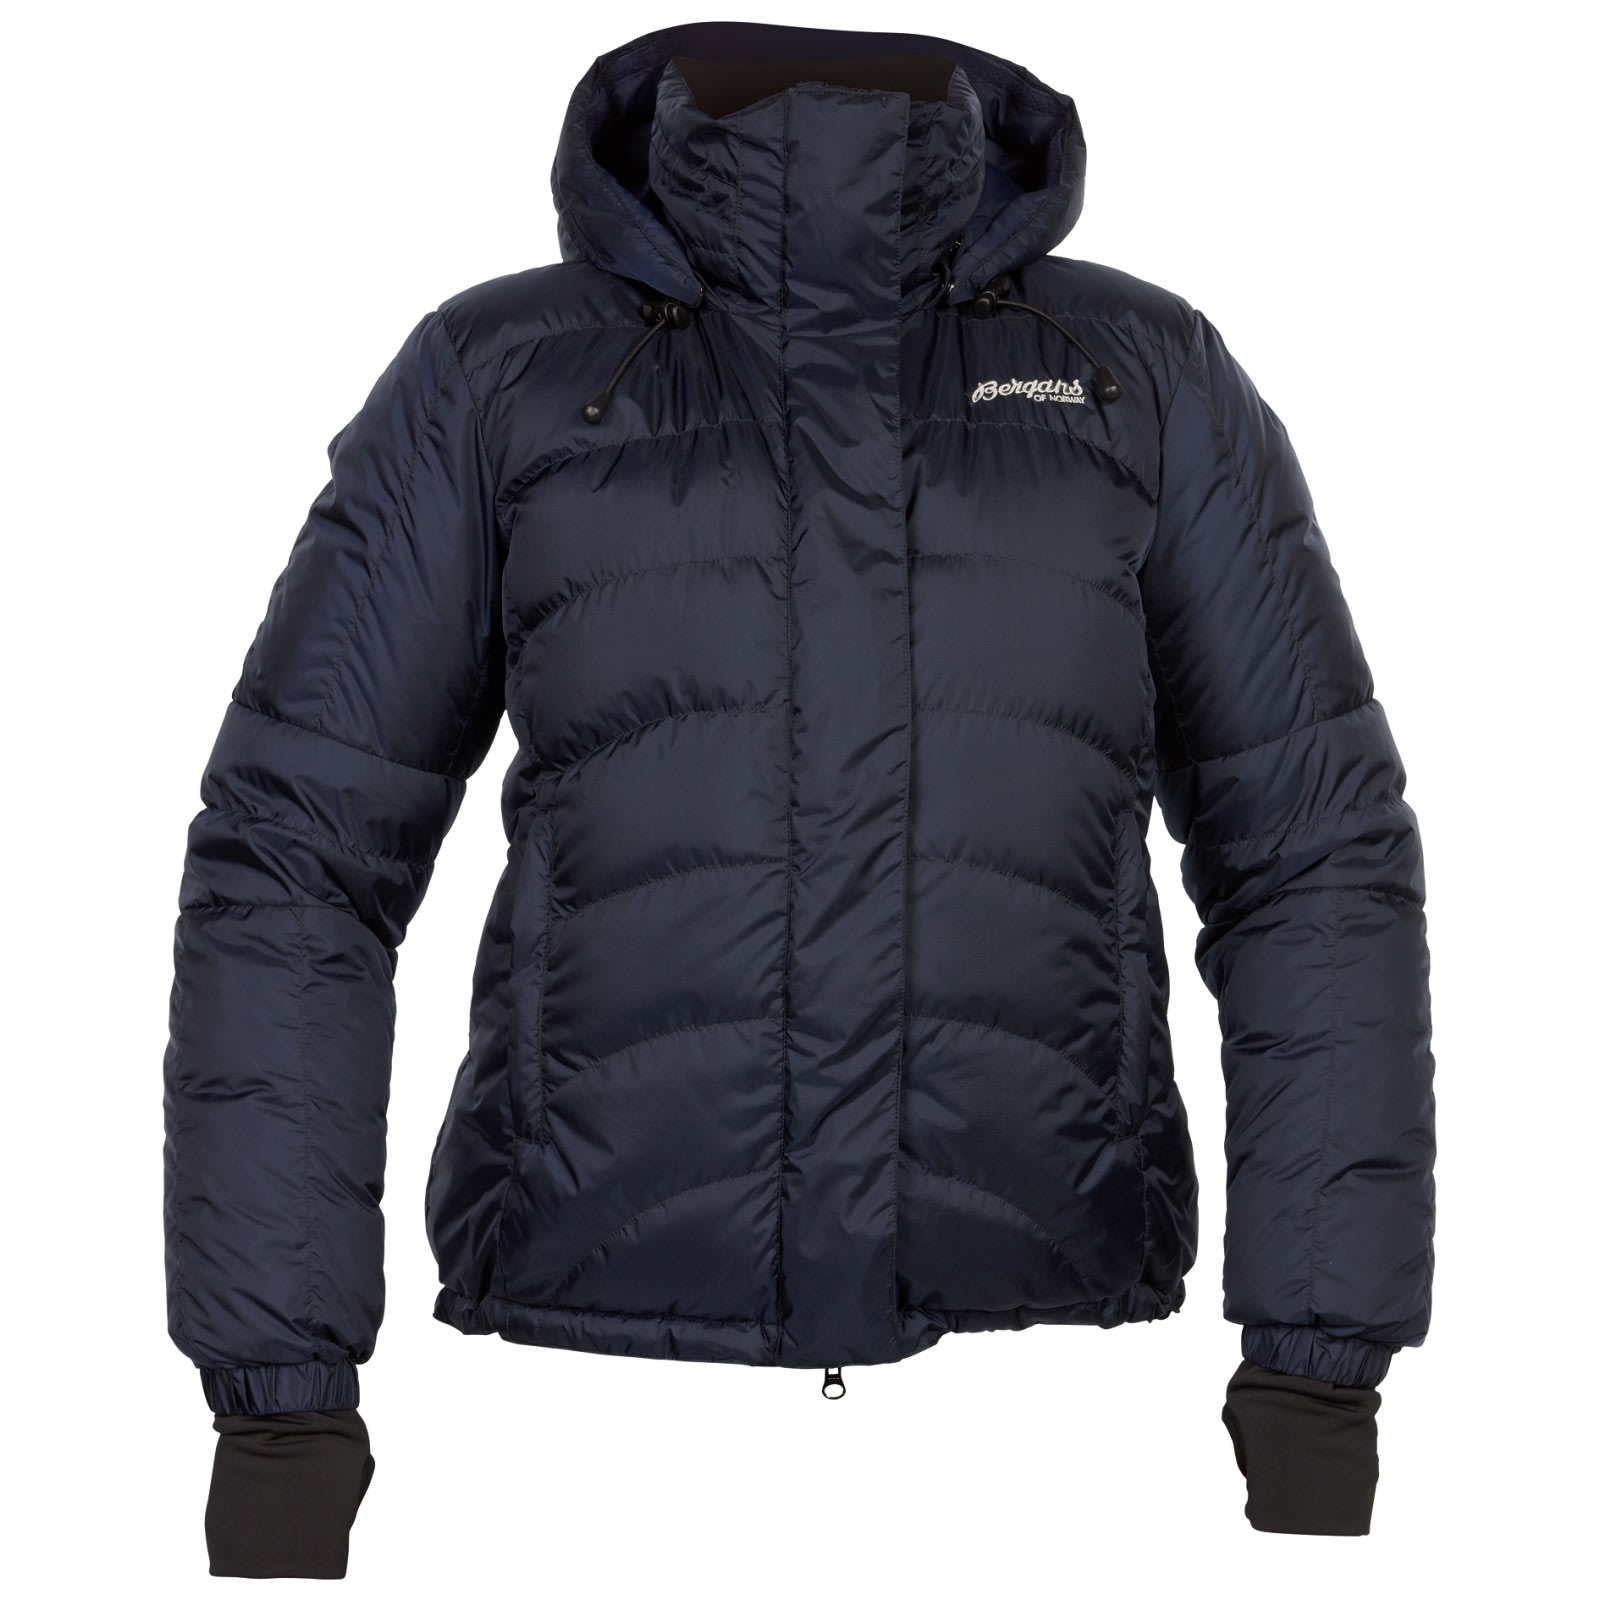 I gentage reductor Buy Bergans Down Lady Jacket from Outnorth